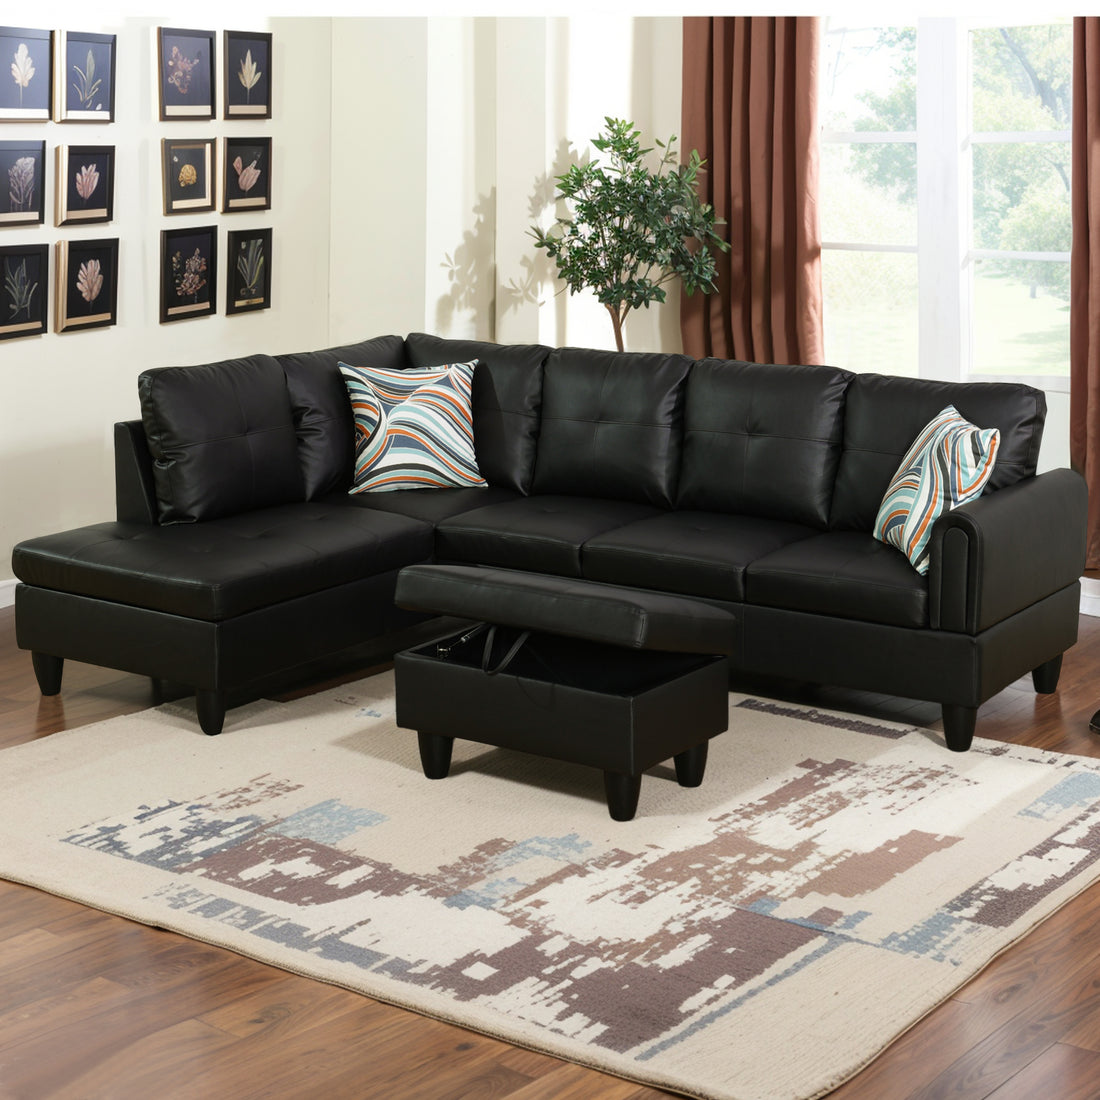 Modern Faux Leather Sectional Couch With Chaise